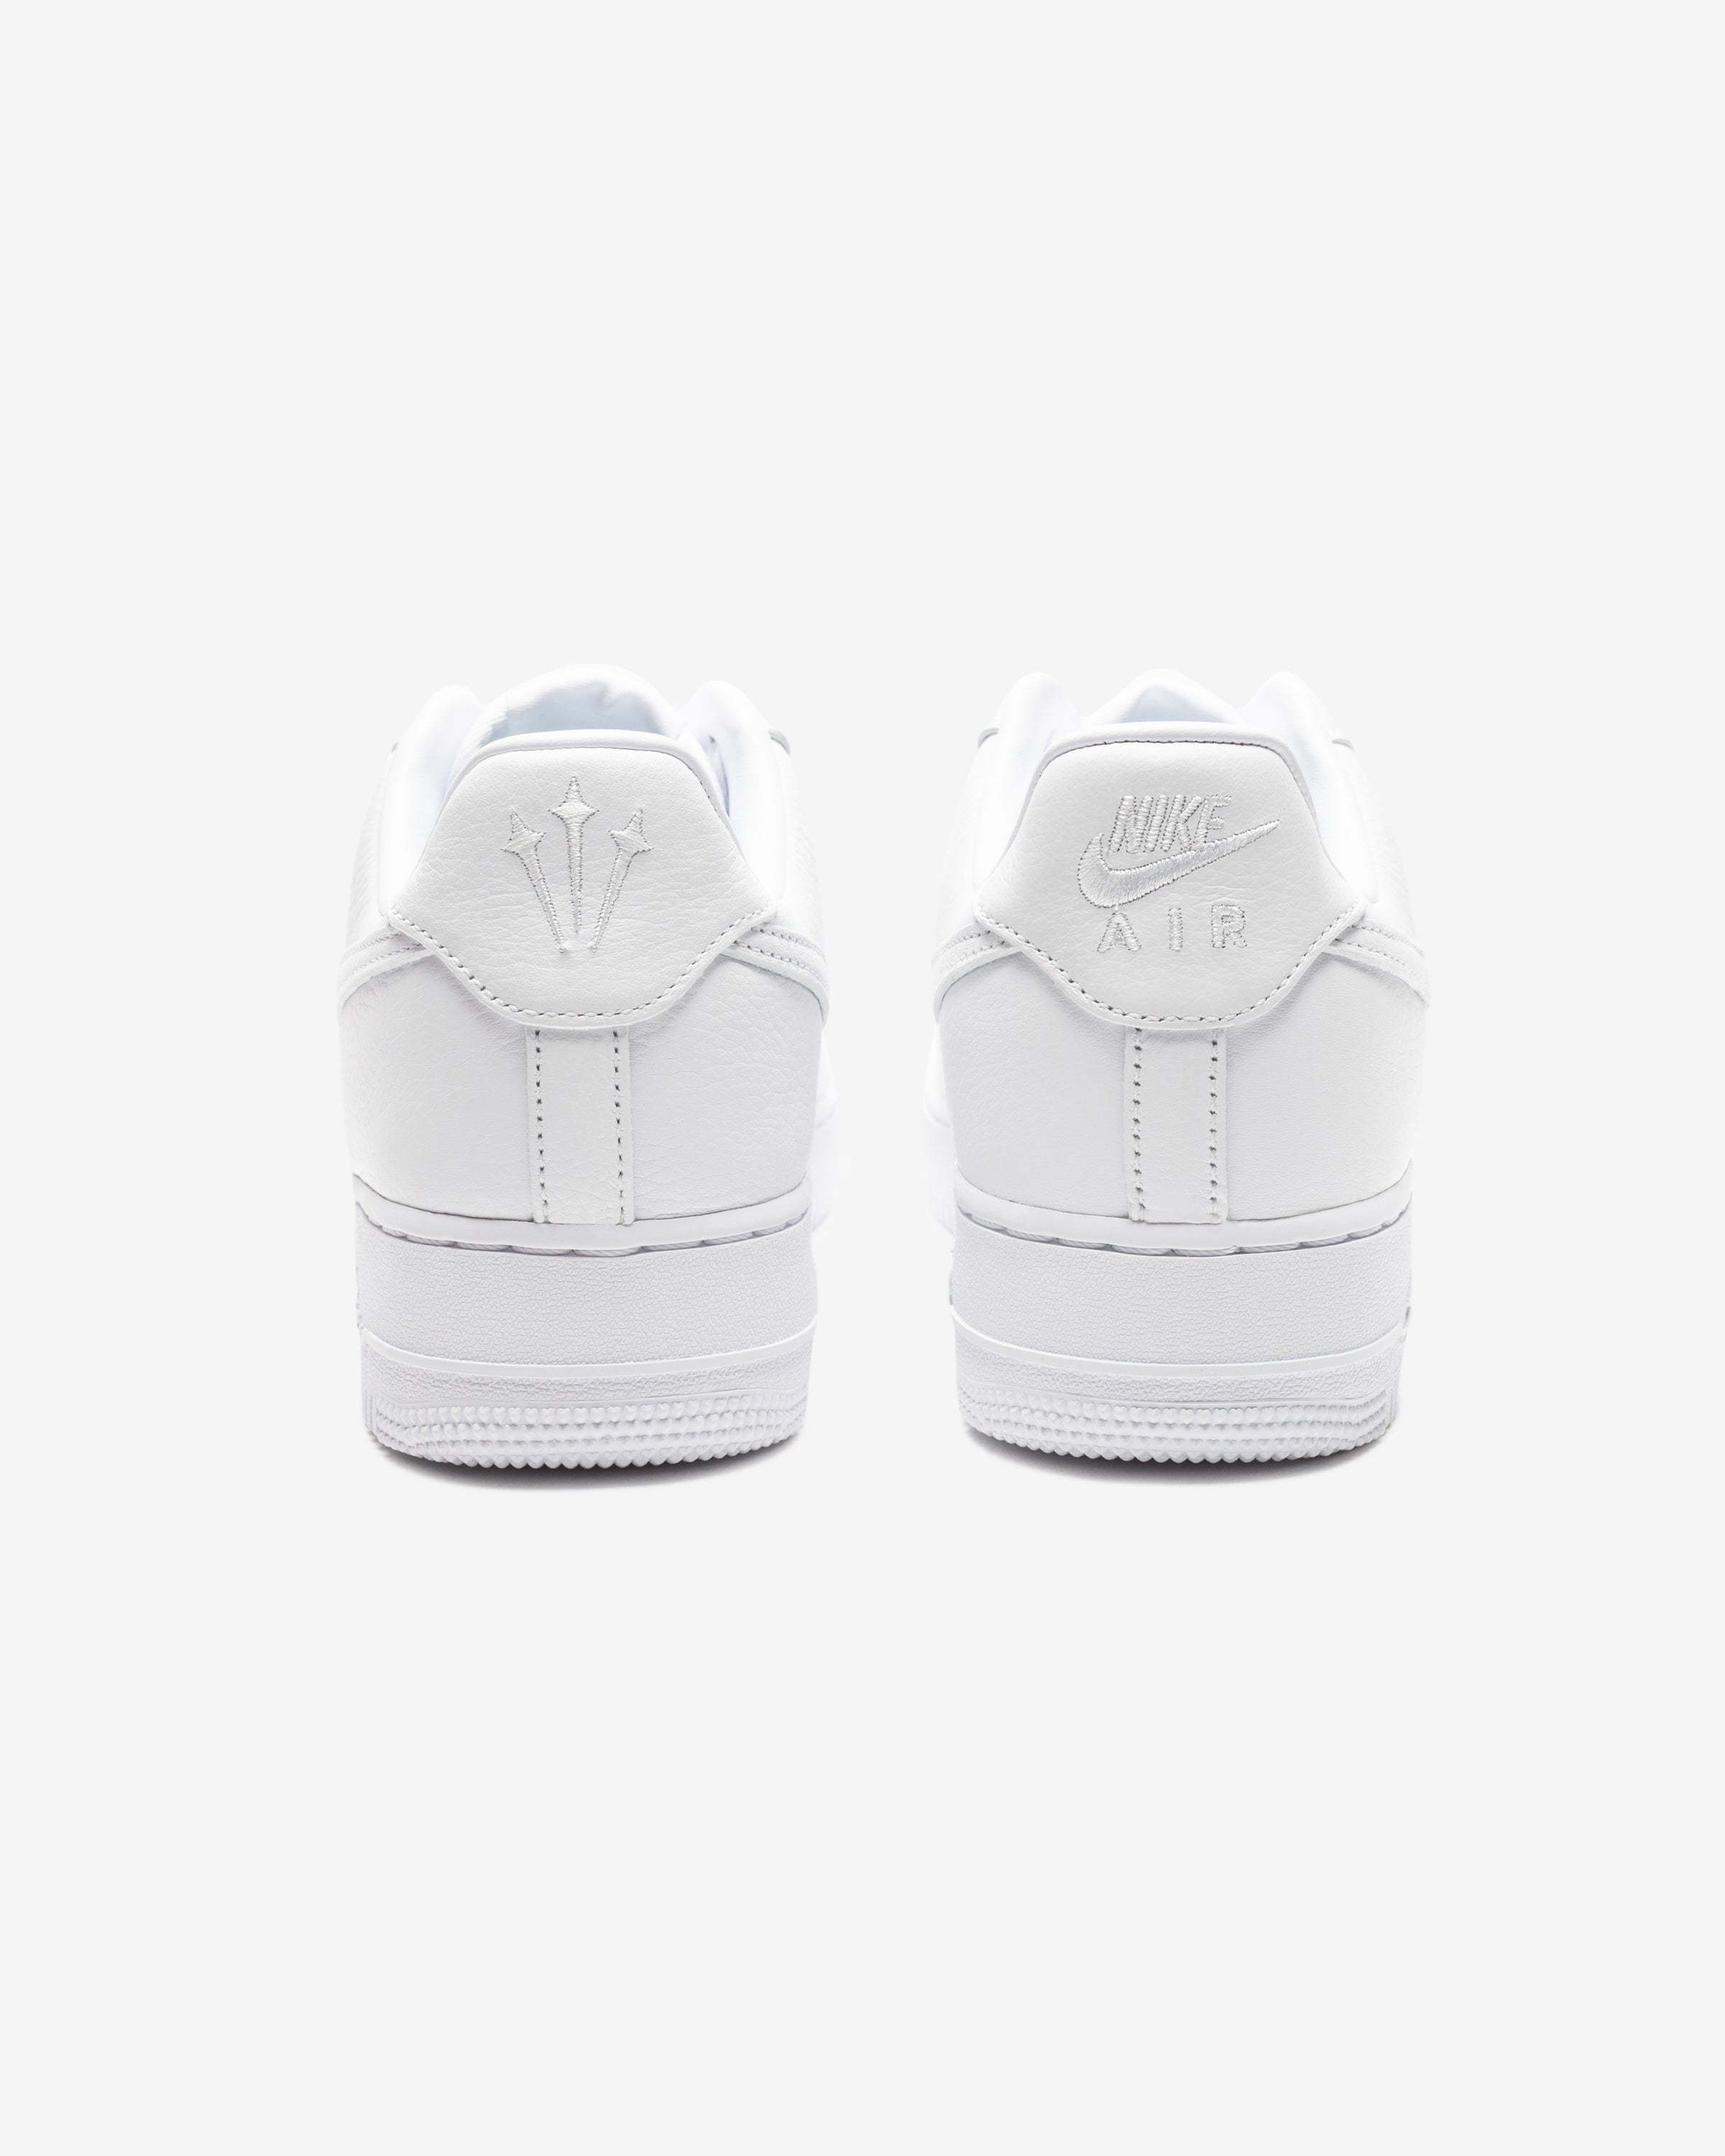 NIKE X NOCTA AIR FORCE 1 LOW - WHITE/ COBALTTINT